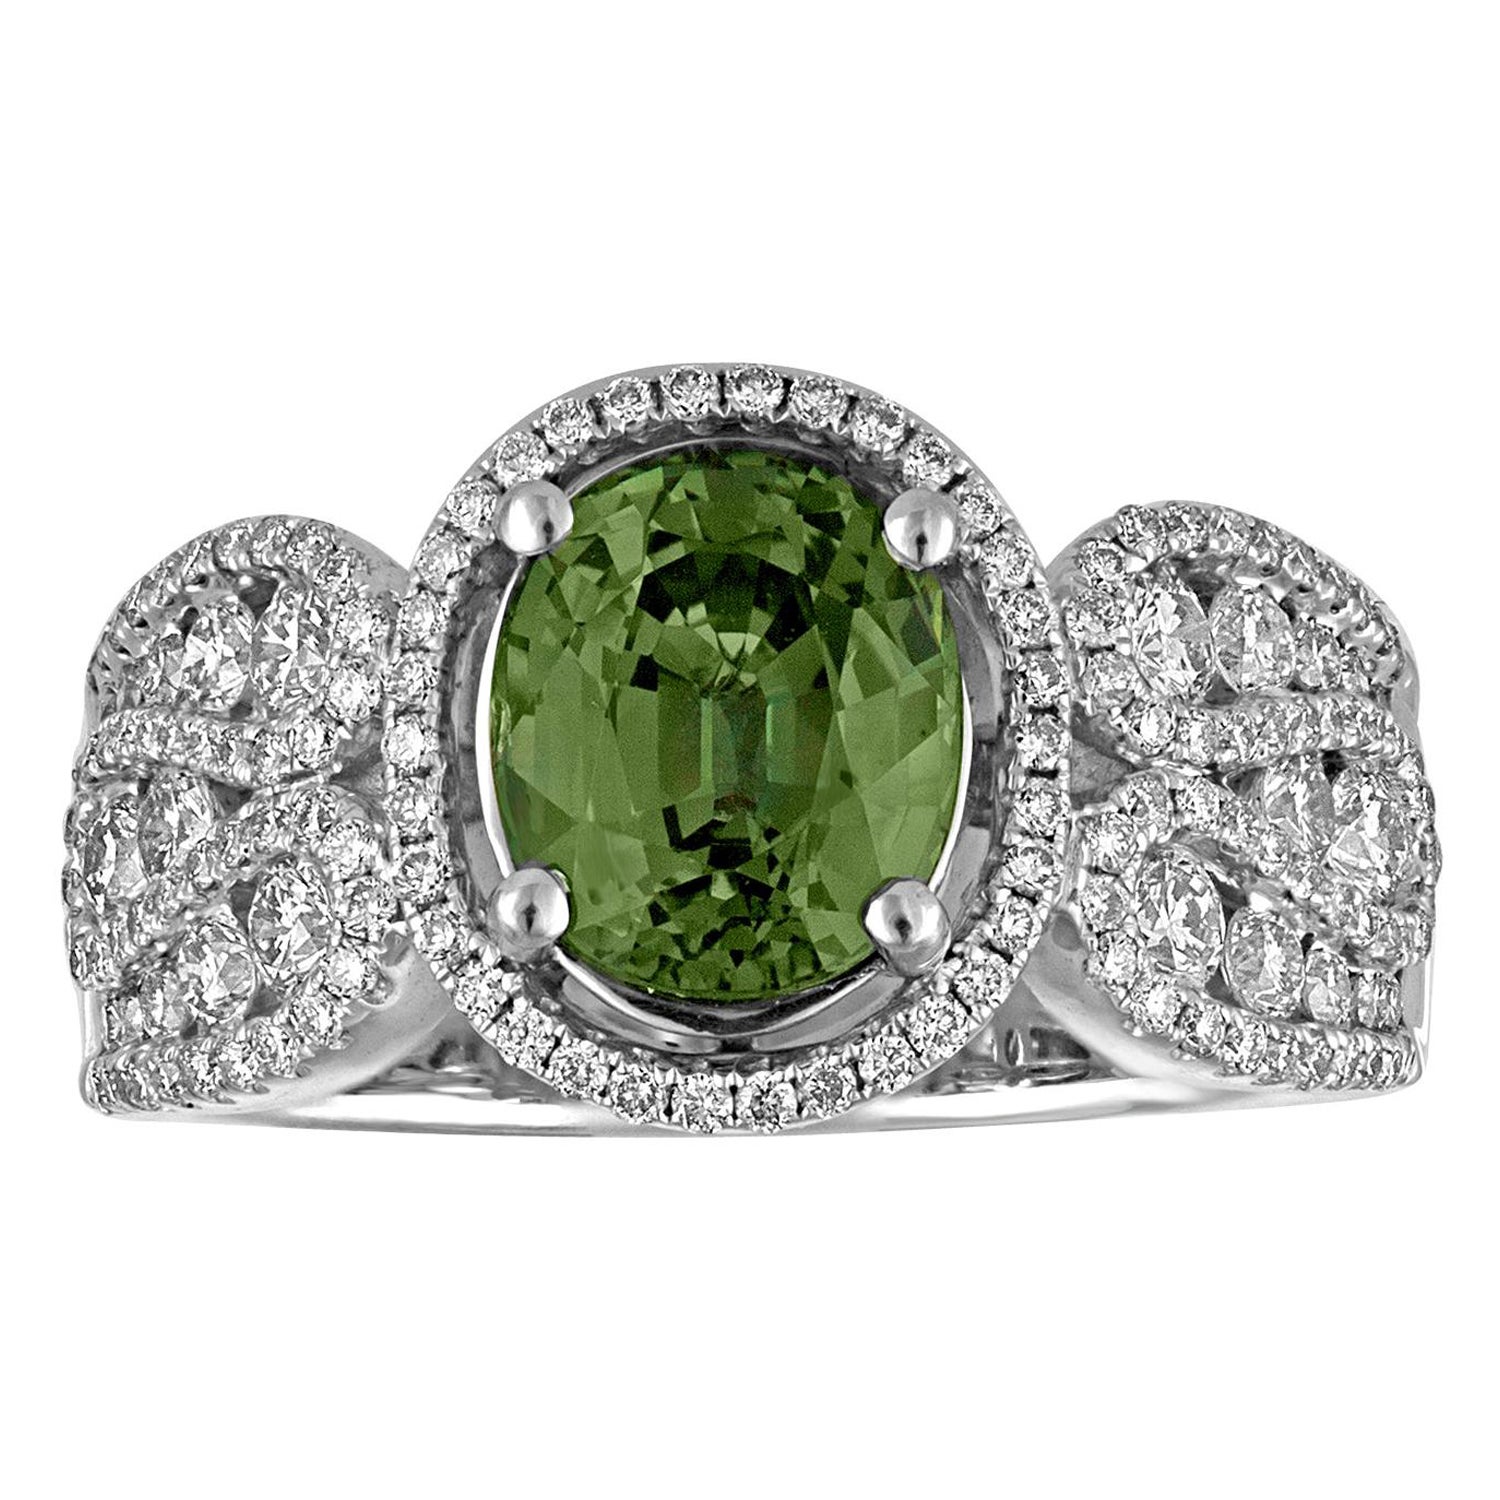 Certified 3.08 Carat Oval Green Sapphire Diamond Gold Ring For Sale